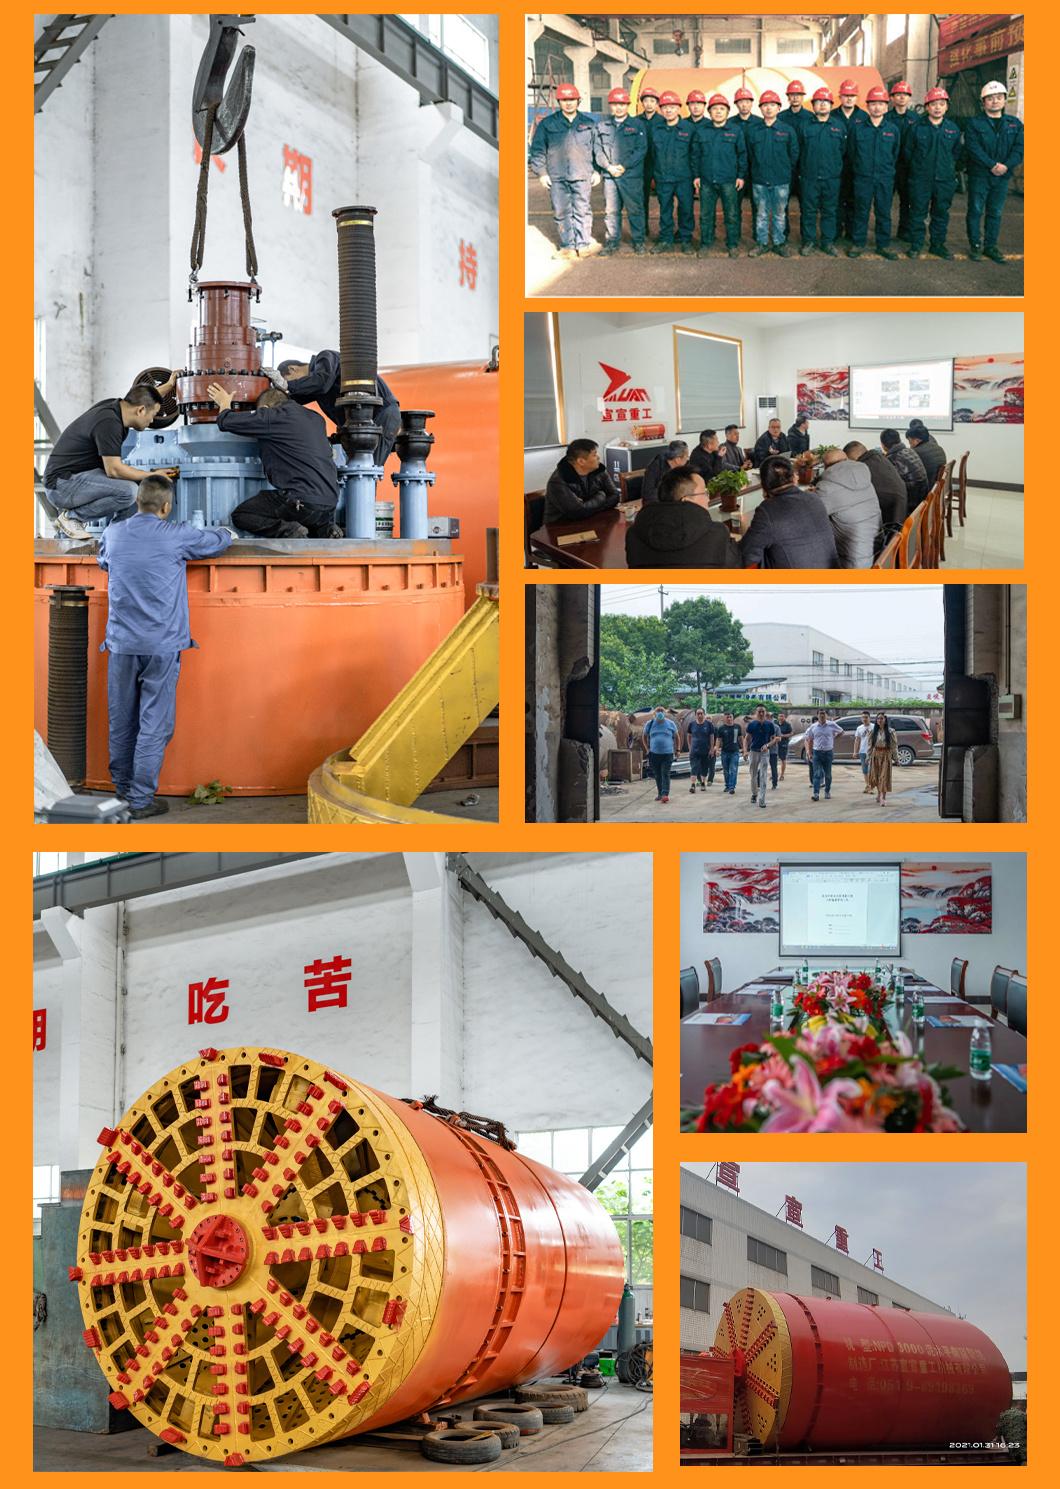 Irrigation Project Boring Microtunneling Pipe Jacking Slurry Blance Machine for Sewage Pipe